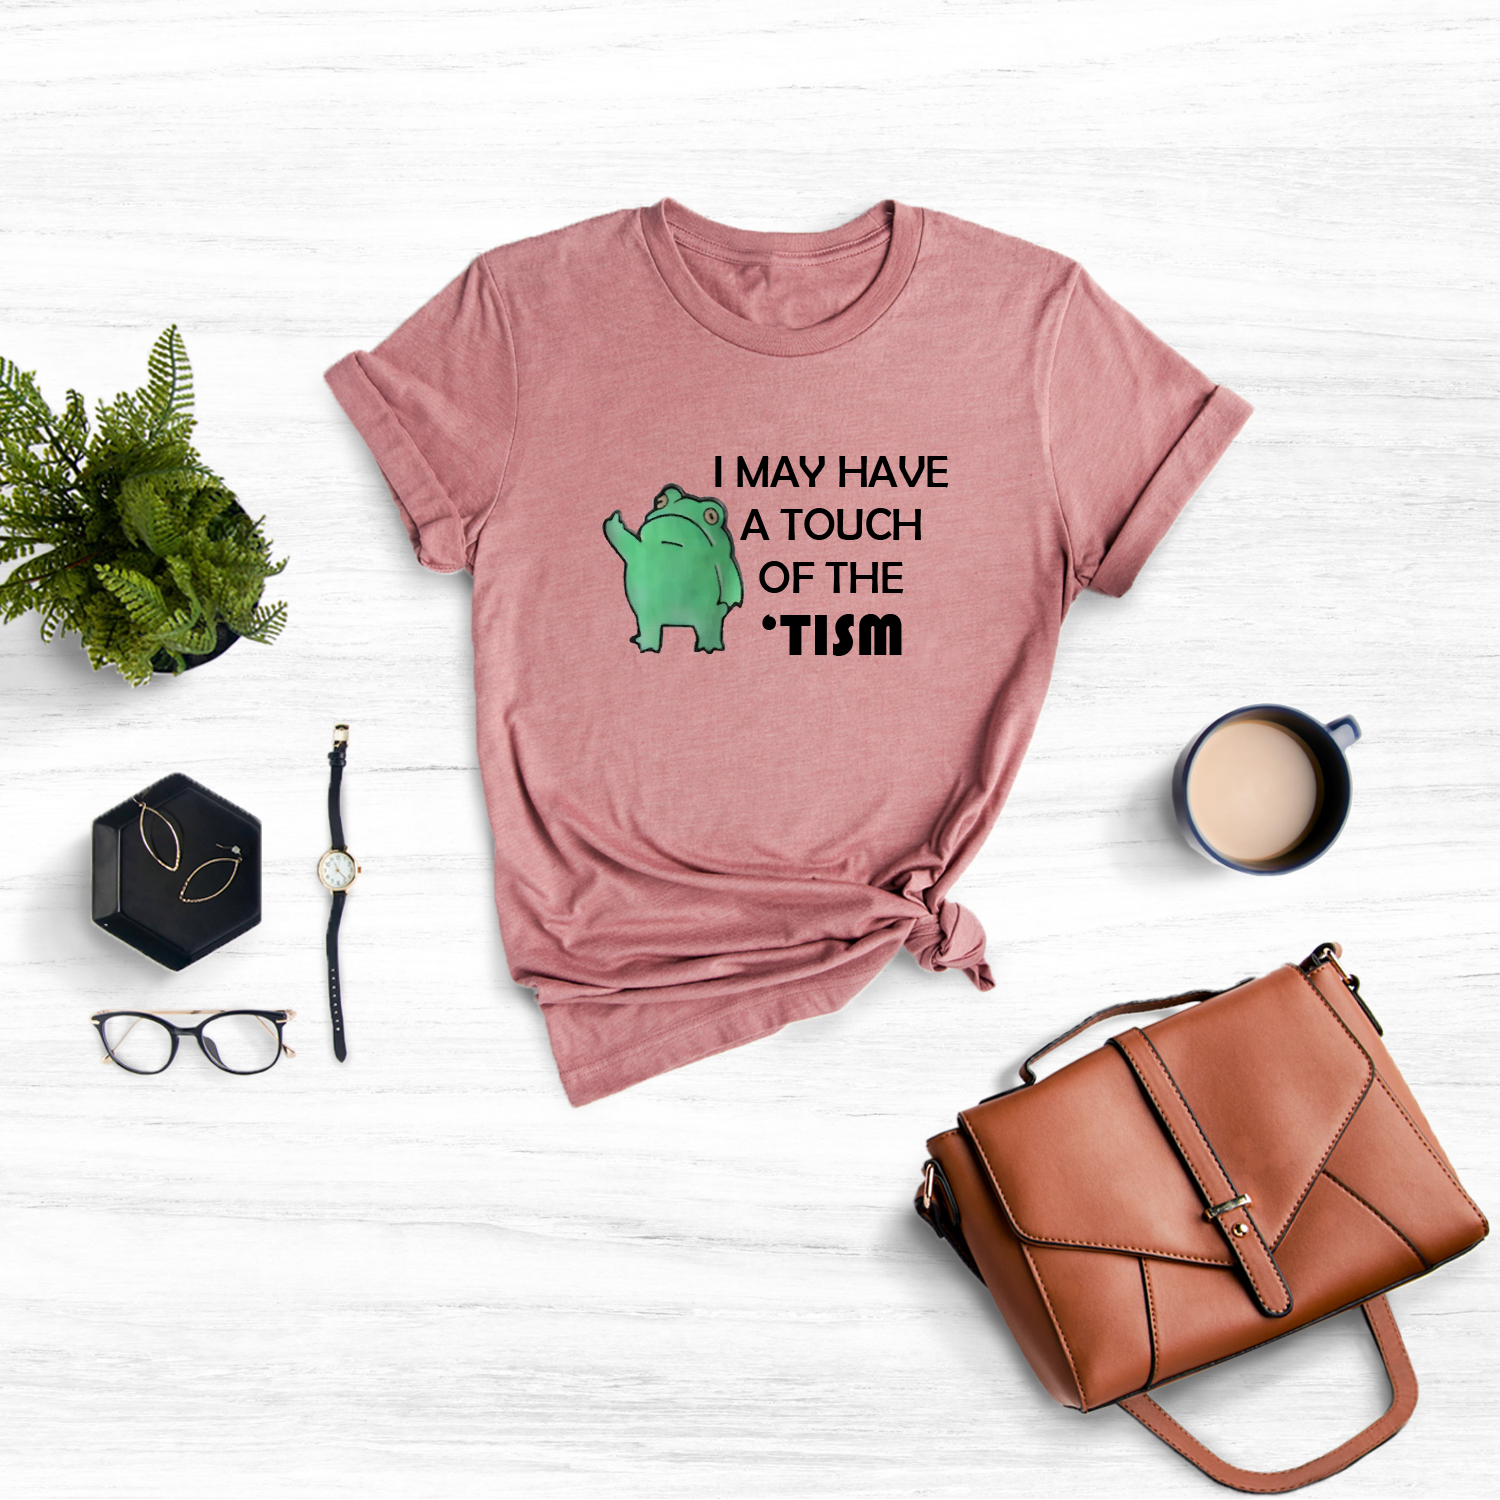 Embrace your unique personality with this delightful "I May Have a Touch of the" tee. 